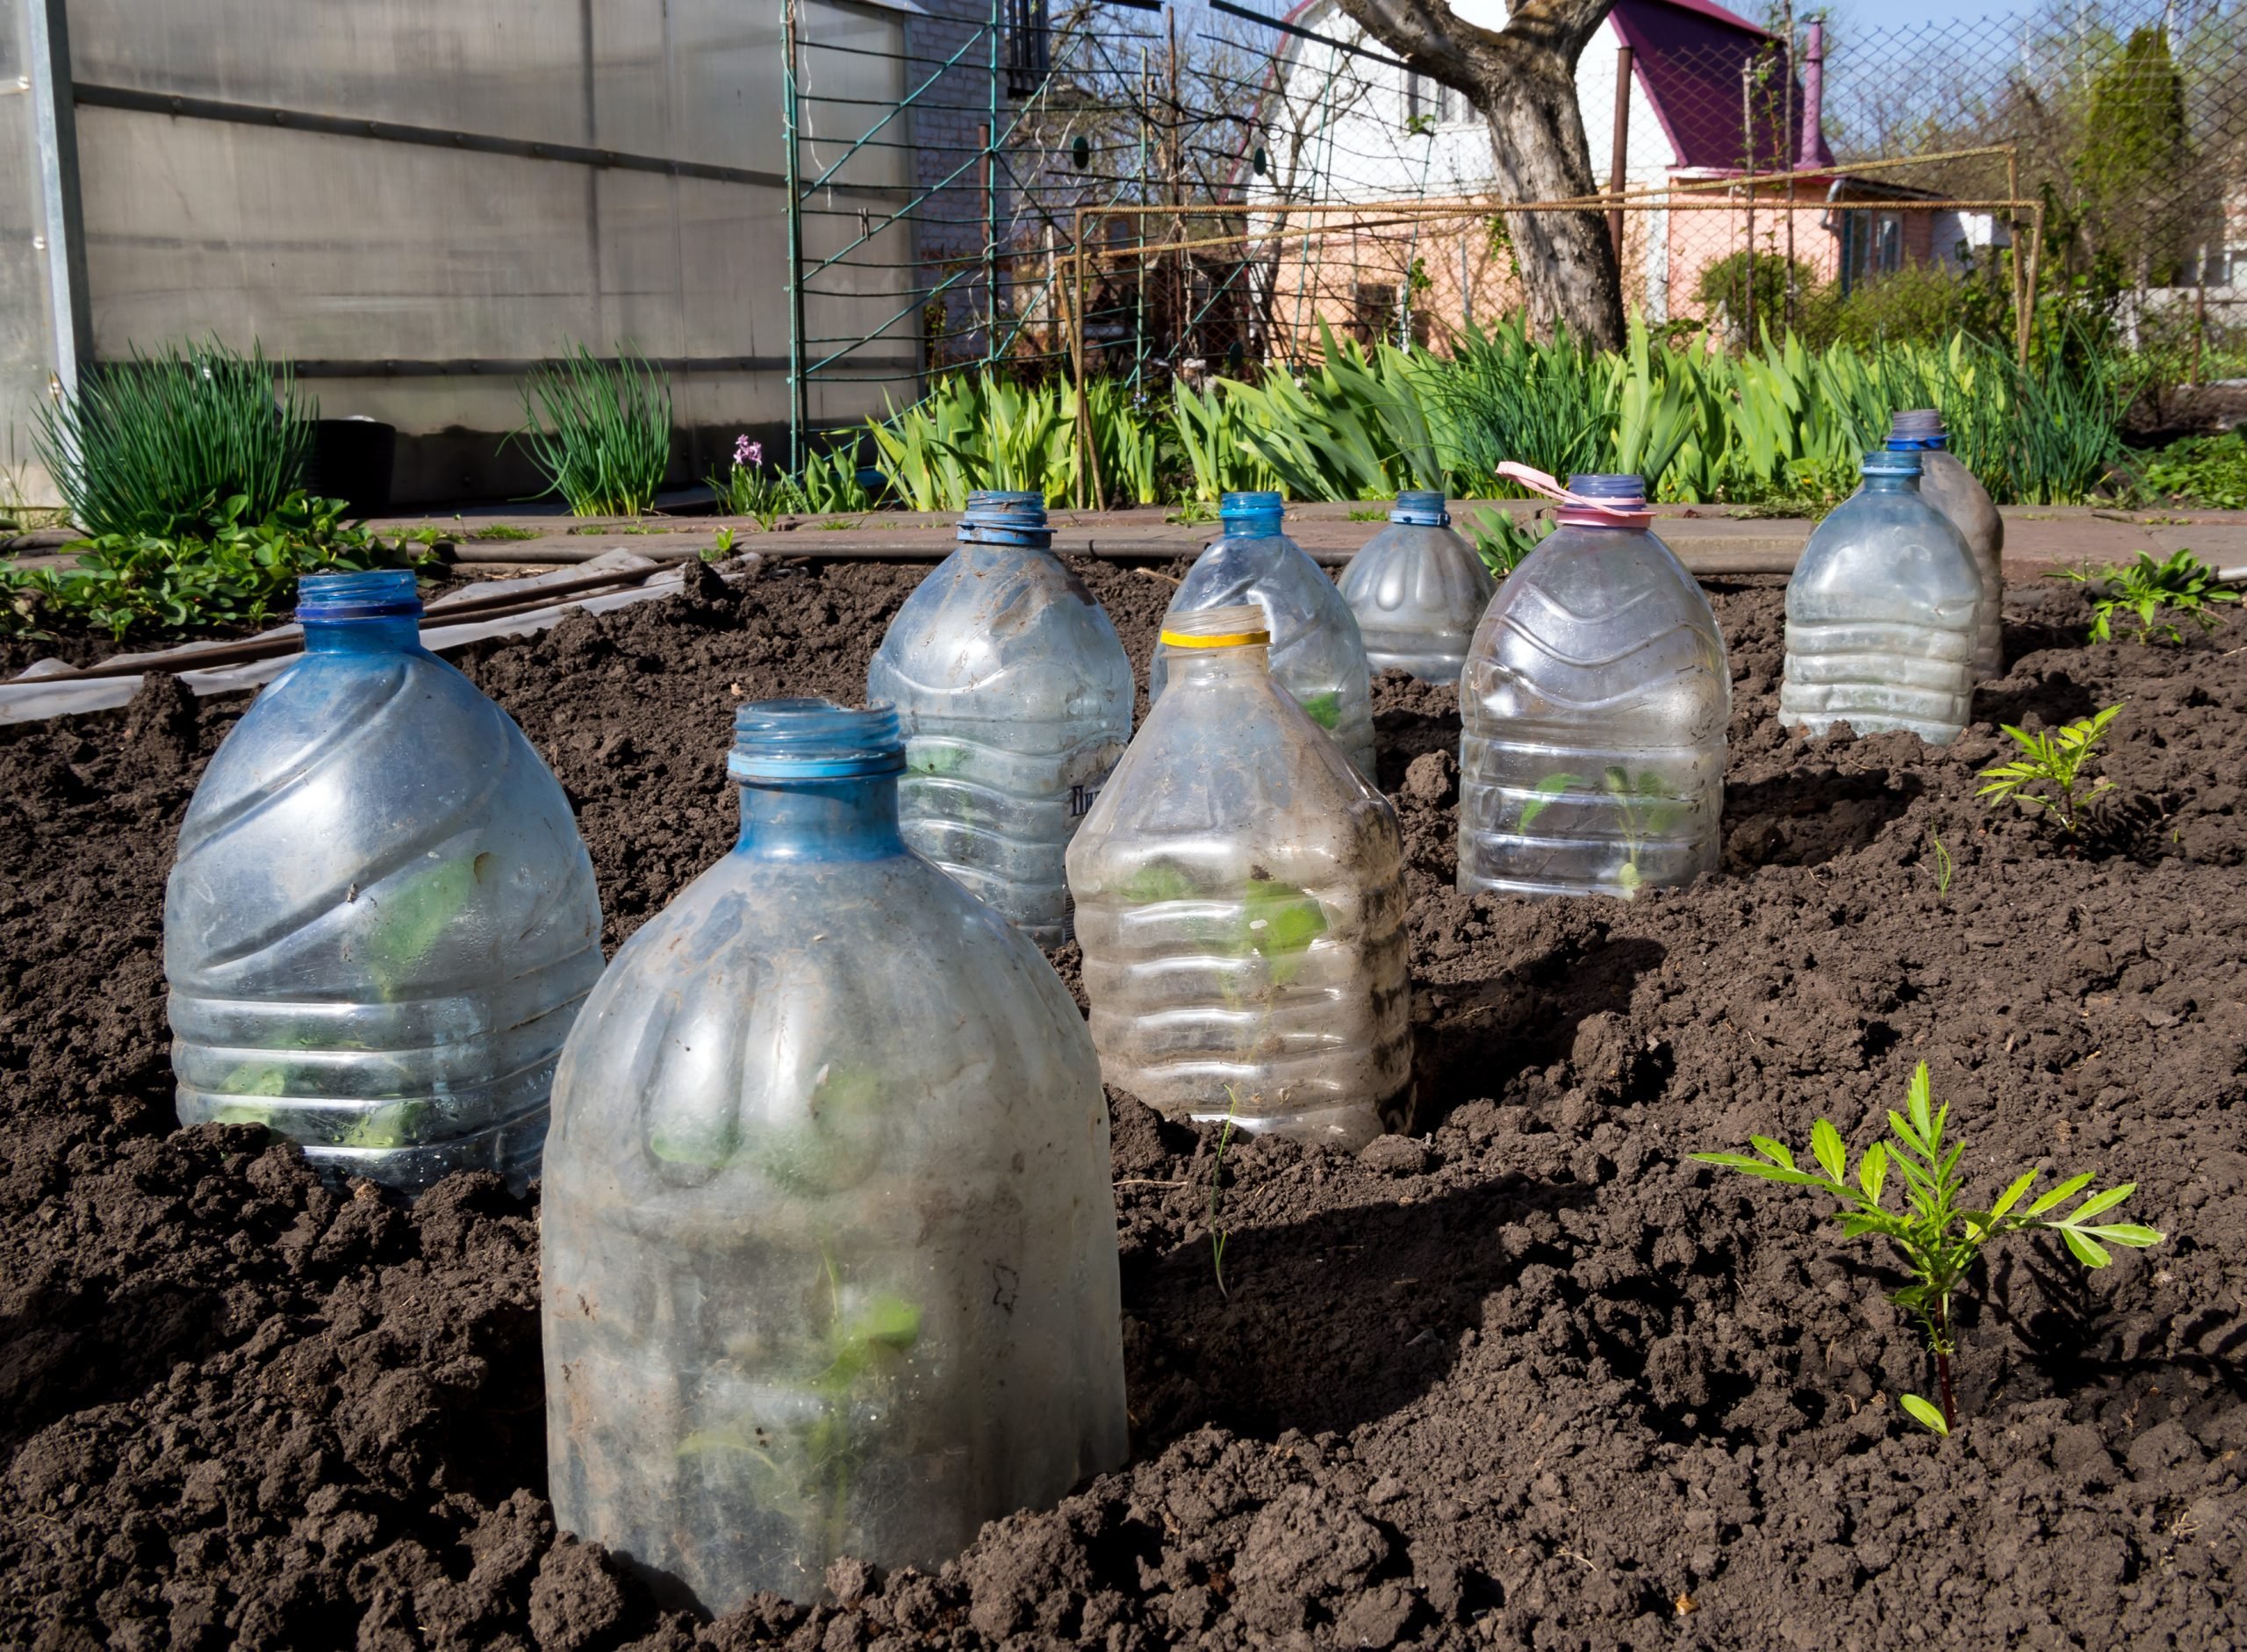 Variety of plastic bottles protect the seedlings in an outdoor garden